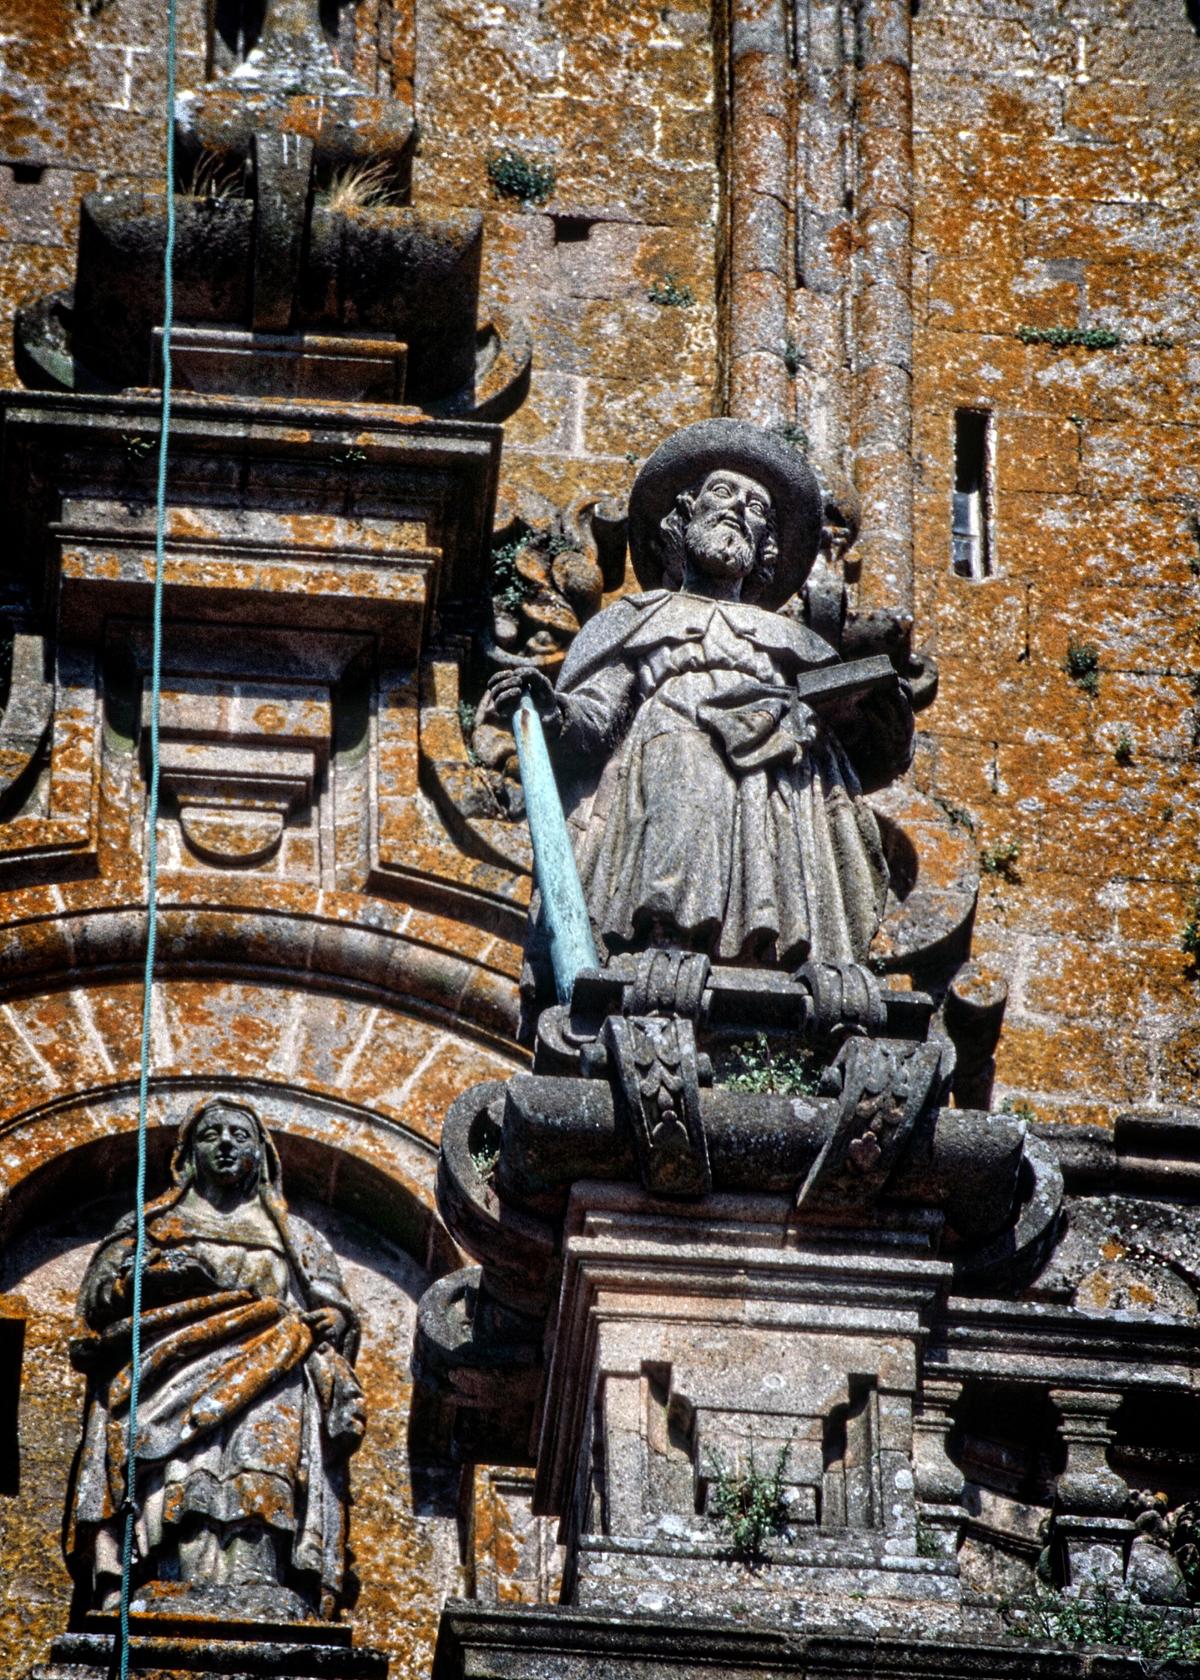 Large, impressive statues adorn the exterior of the Cathedral of Santiago, which dates to the ninth century and was built to house the remains of the apostle James. (Copyright Fred J. Eckert)